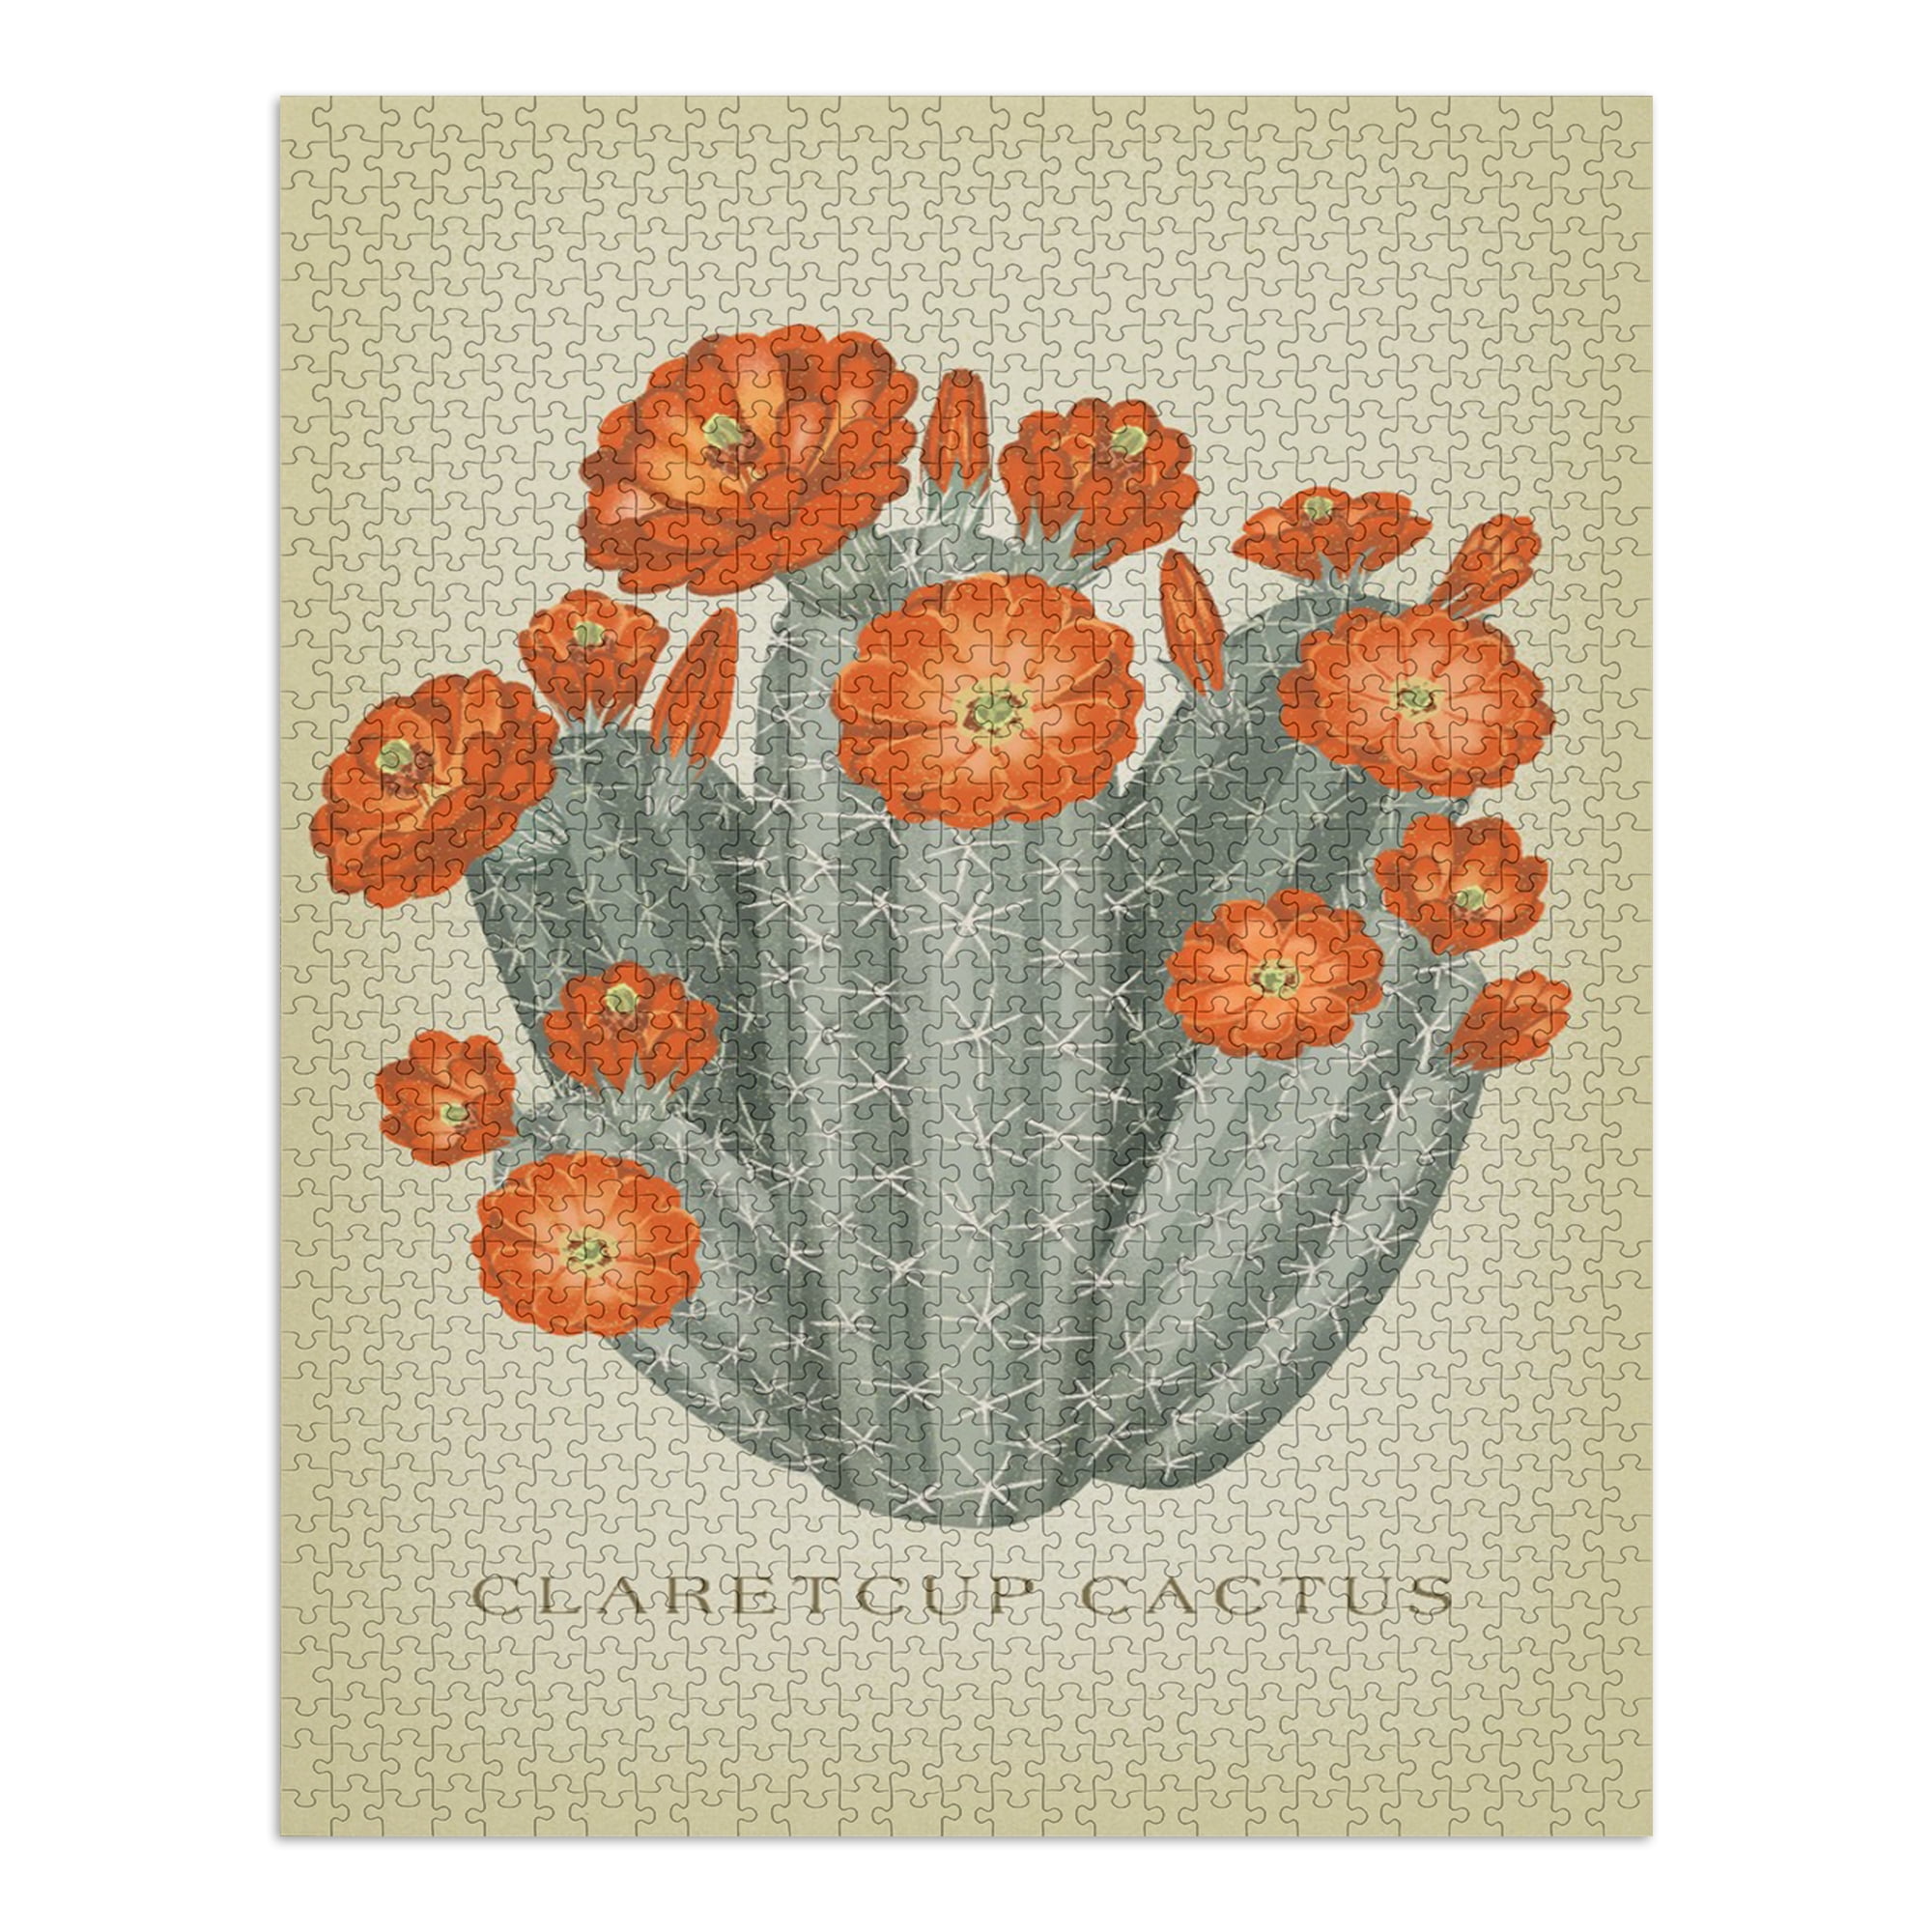 Claretcup Cactus, Vintage Flora (1000 Piece Puzzle, Size 19x27, Challenging Jigsaw  Puzzle for Adults and Family, Made in USA) - Walmart.com